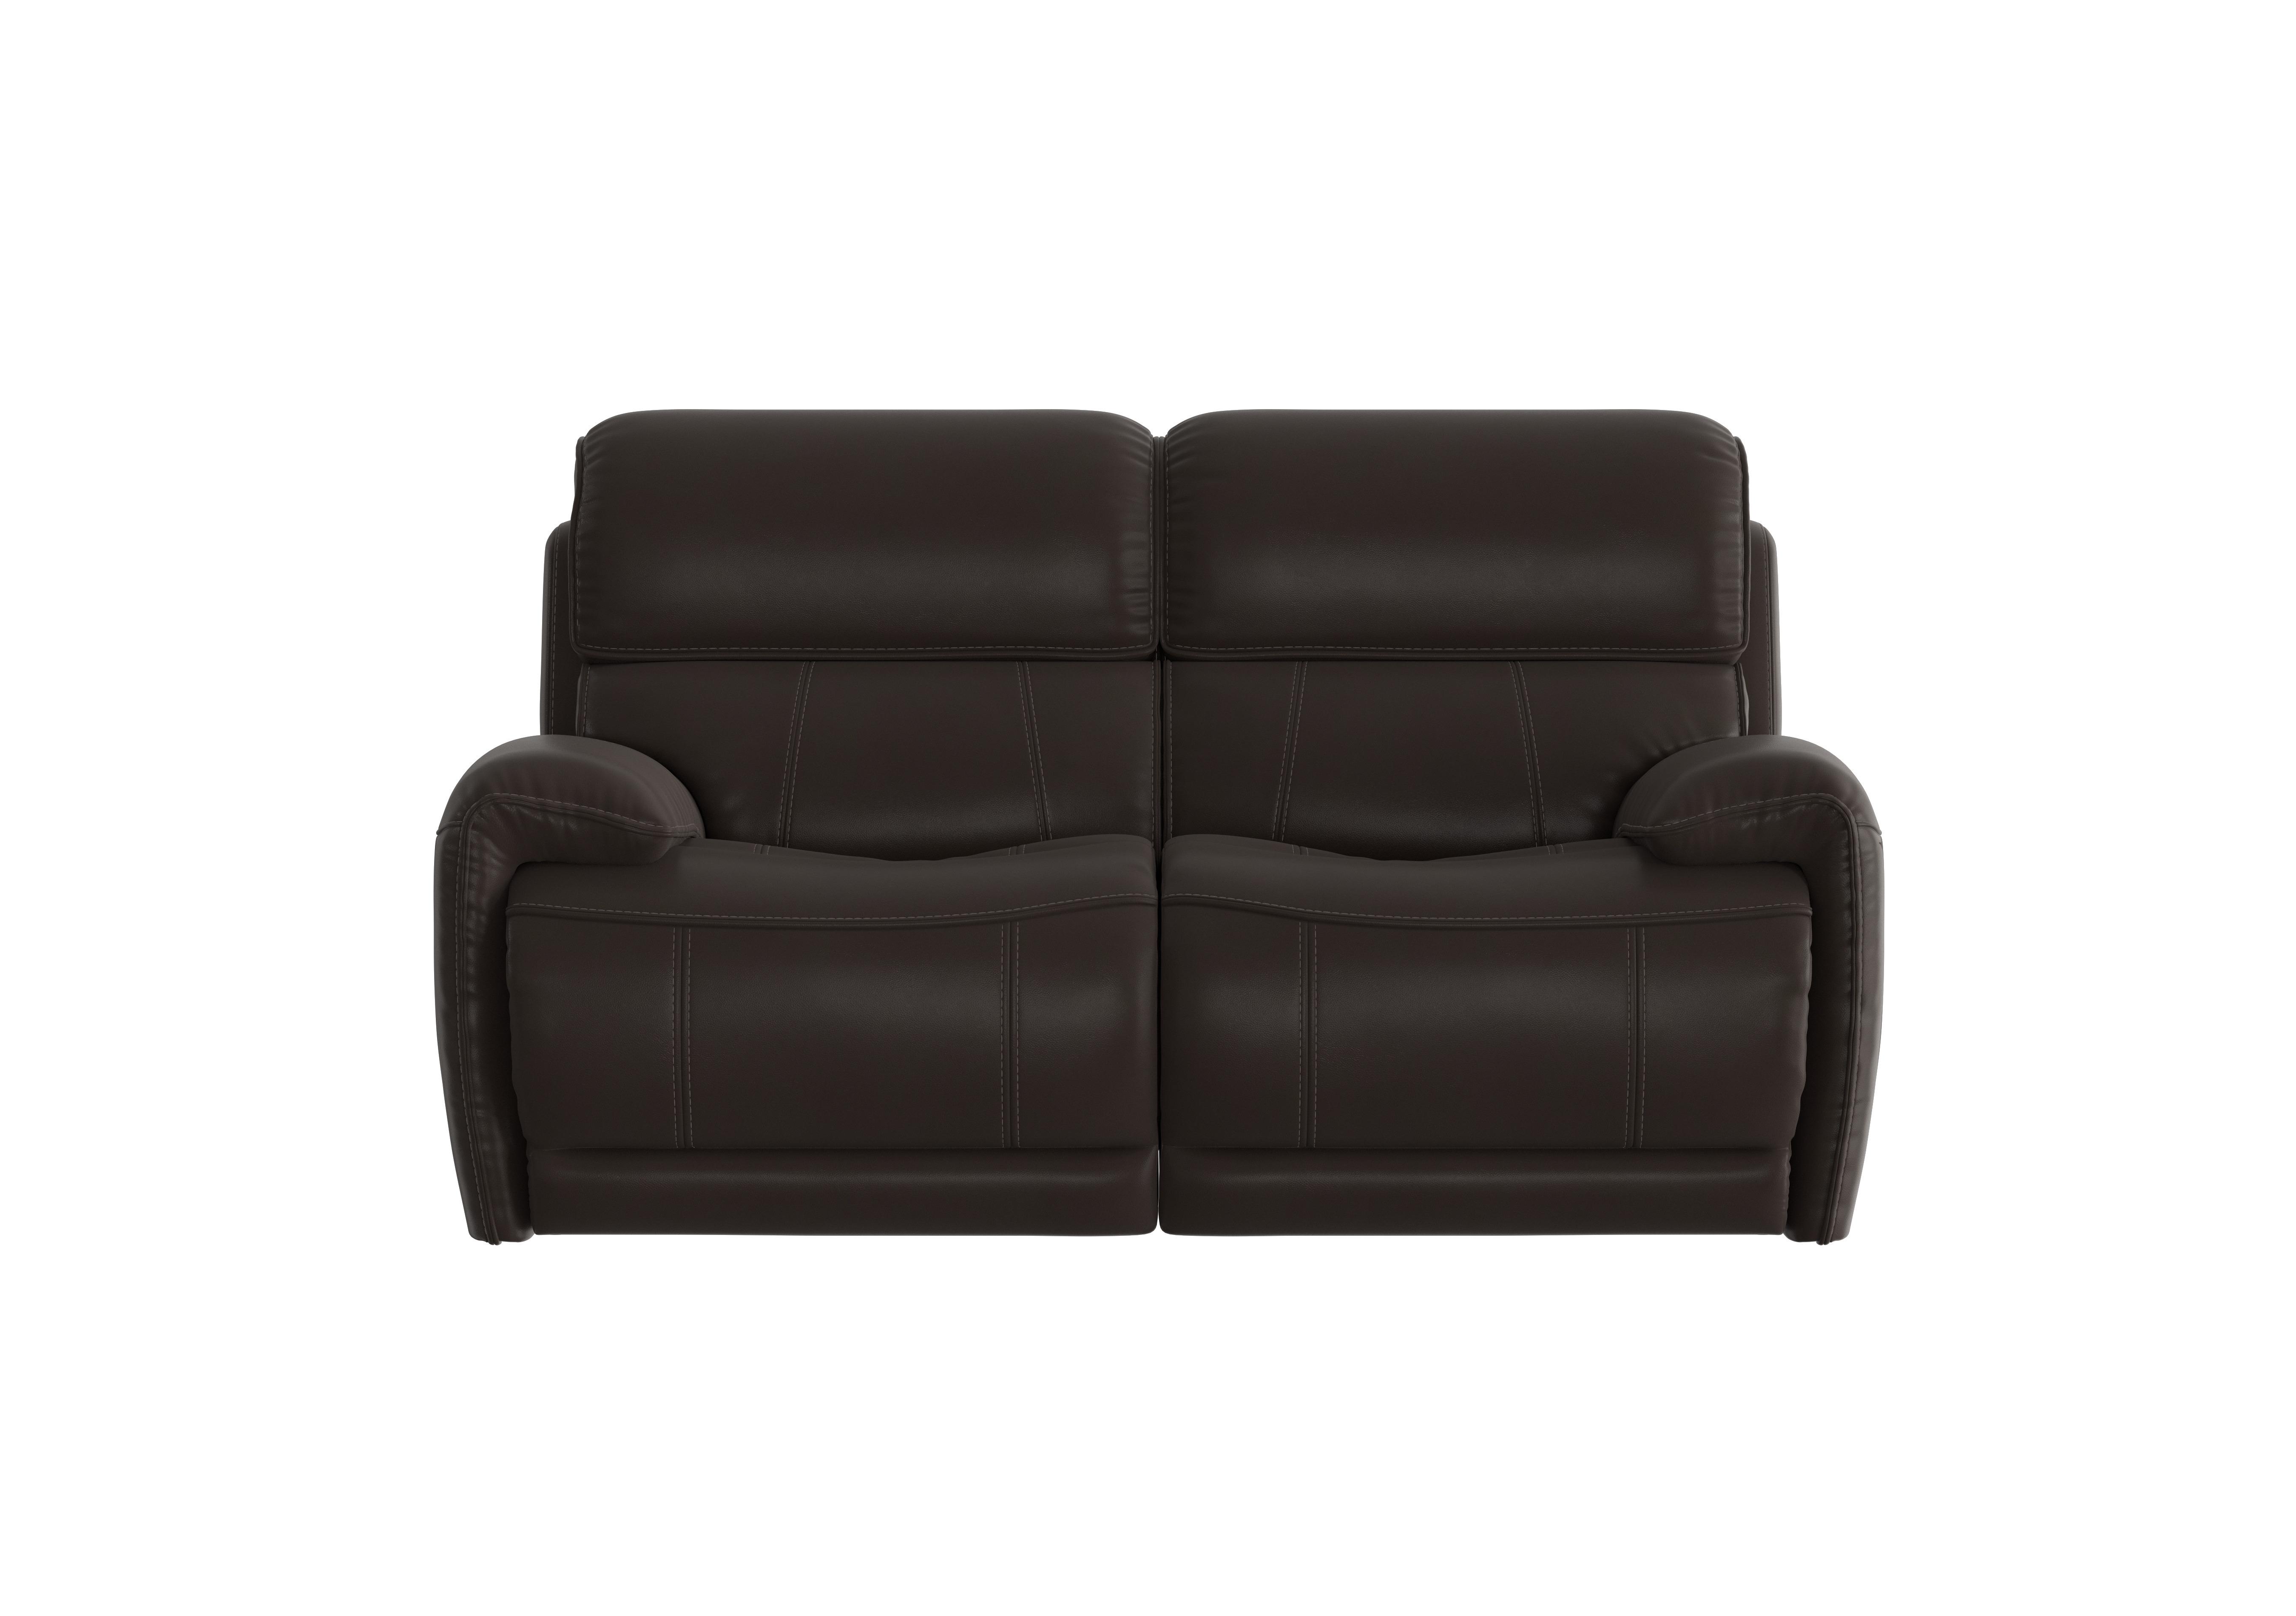 Link 2 Seater Leather Power Recliner Sofa with Power Headrests in Bv-1748 Dark Chocolate on Furniture Village